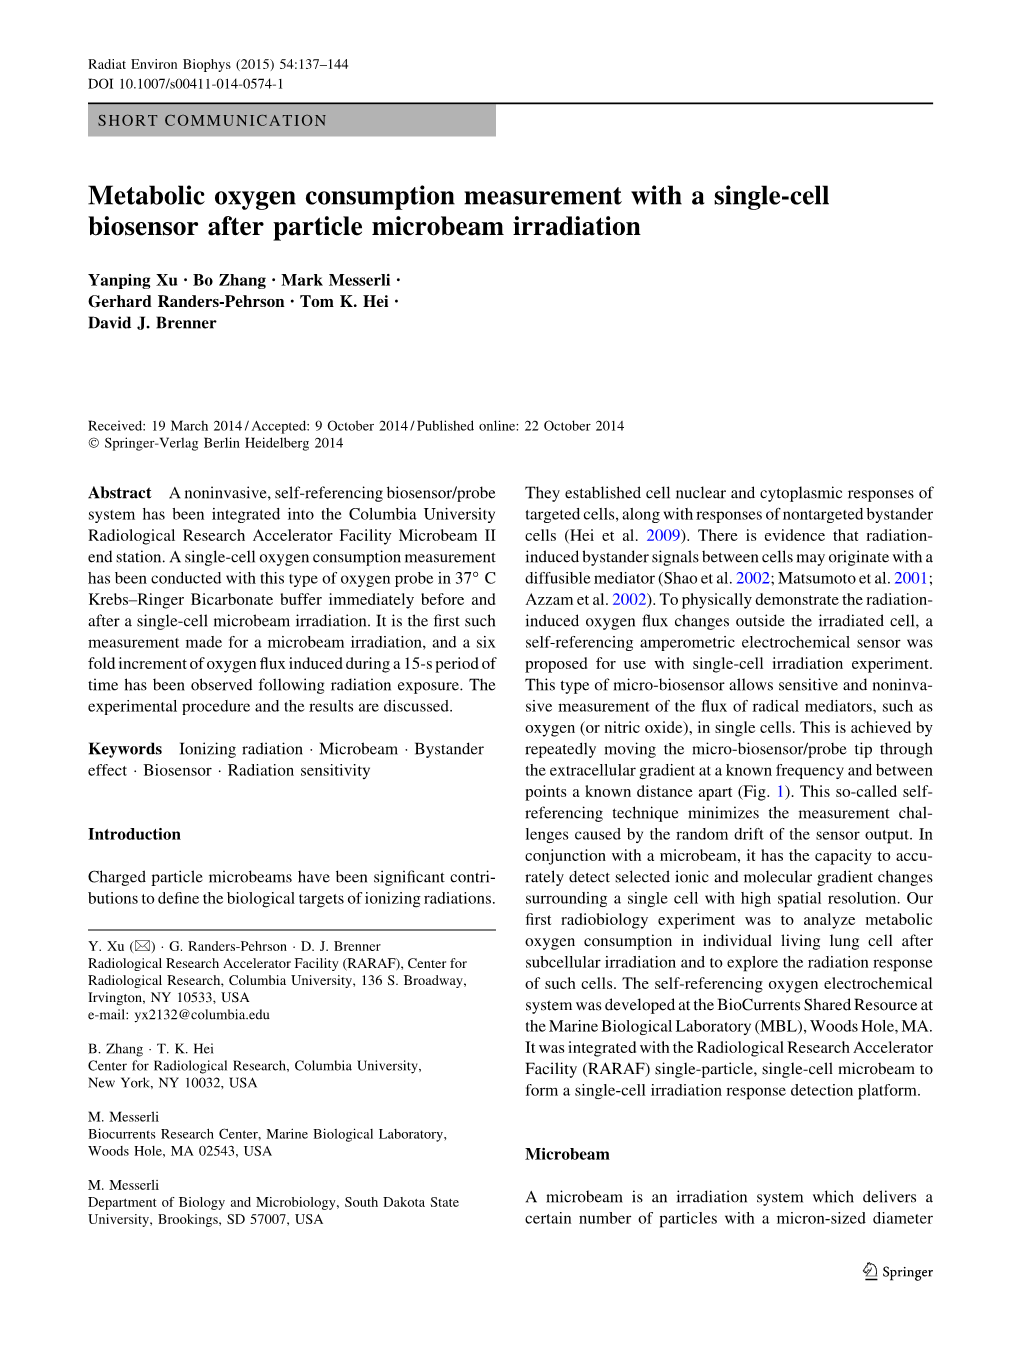 Metabolic Oxygen Consumption Measurement with a Single-Cell.Pdf